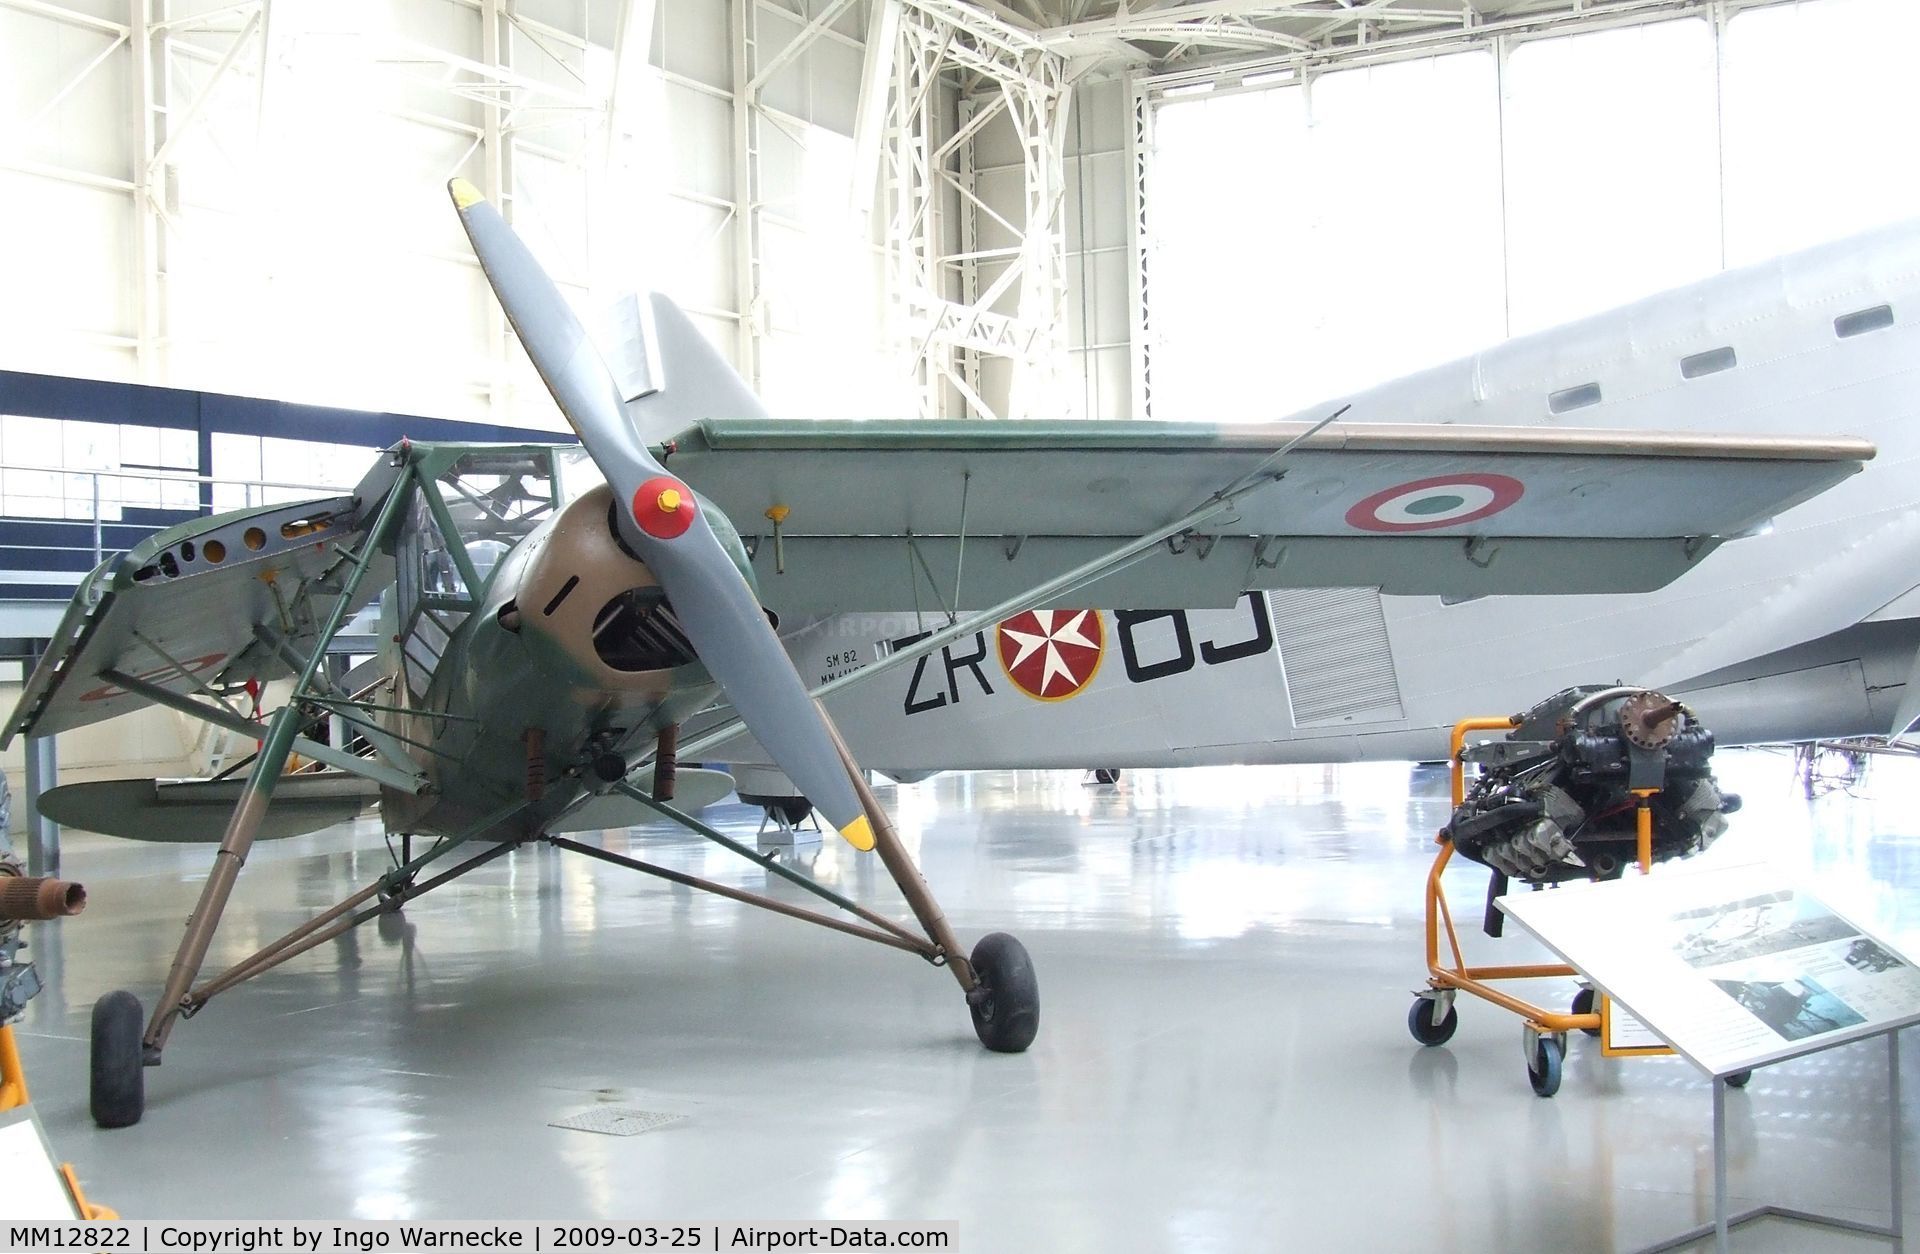 MM12822, 1942 Fieseler Fi-156C-3 Storch C/N 5802, Fieseler Fi 156C-3 Storch at the Museo storico dell'Aeronautica Militare, Vigna di Valle